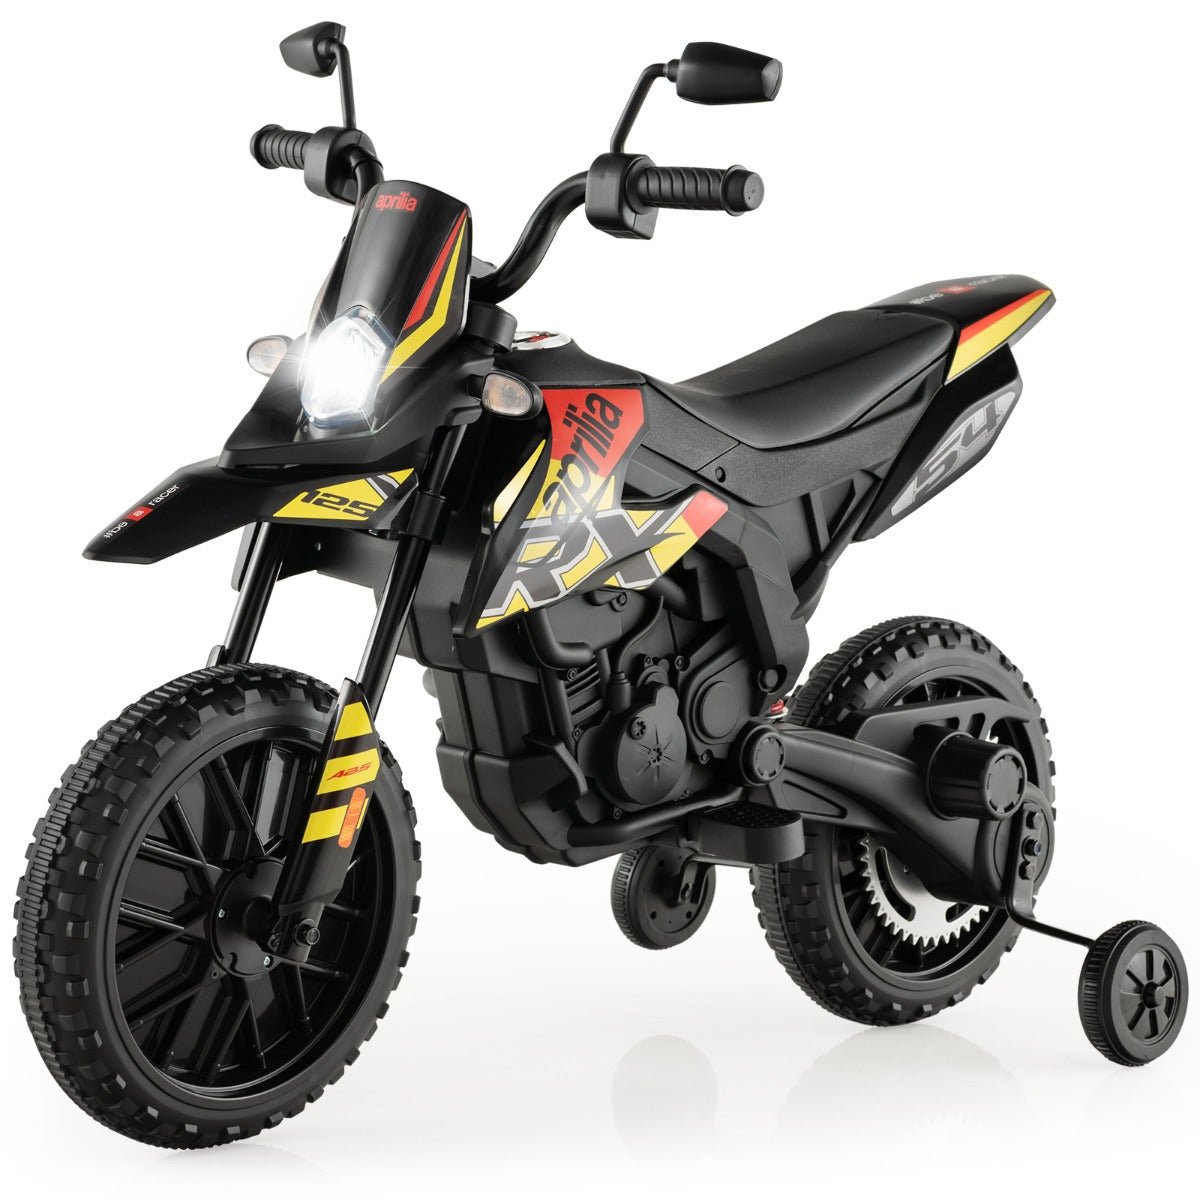 Ride in Style: Licensed Aprilia Kids Motorcycle with Training Wheels, Black